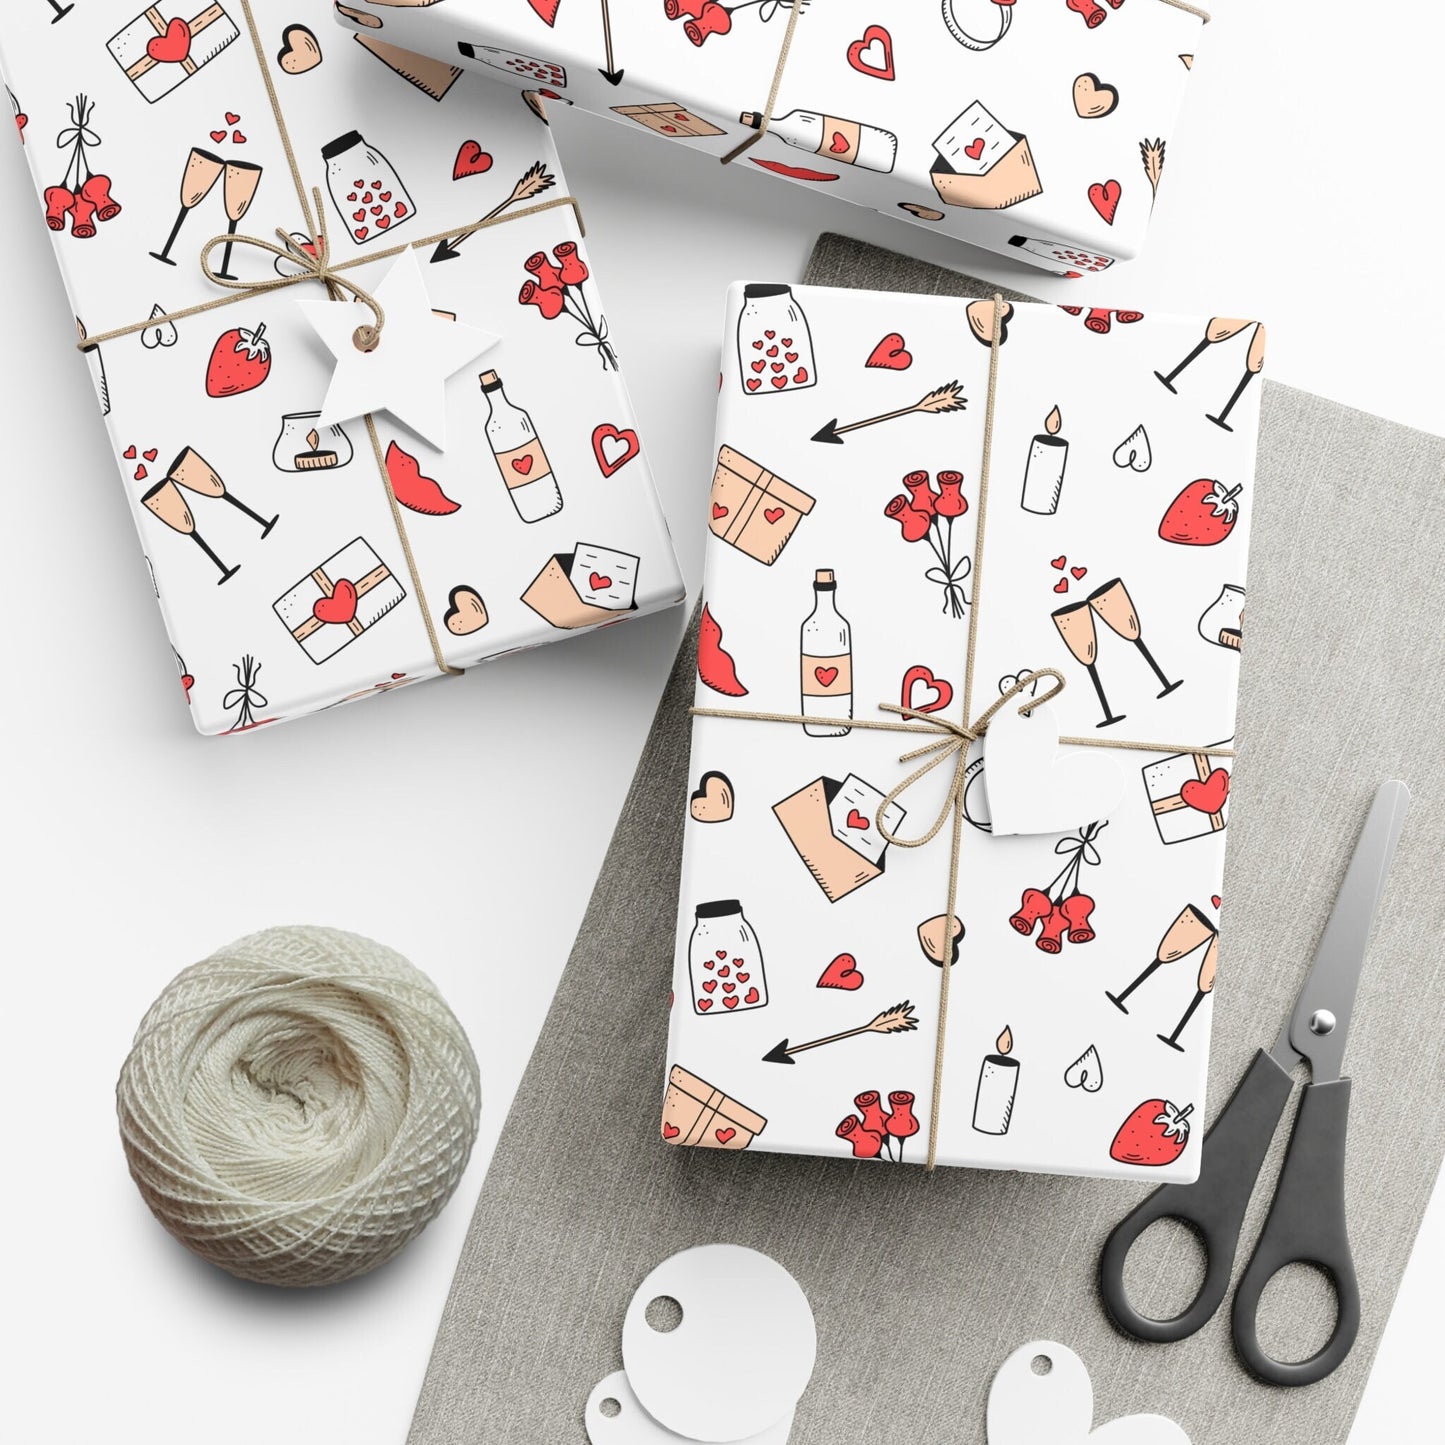 Red Love Wedding Wrapping Paper, Cute Wedding Wrapping Paper, Just Married Gift Wrap, Anniversary Gift Present Paper Roll for Her